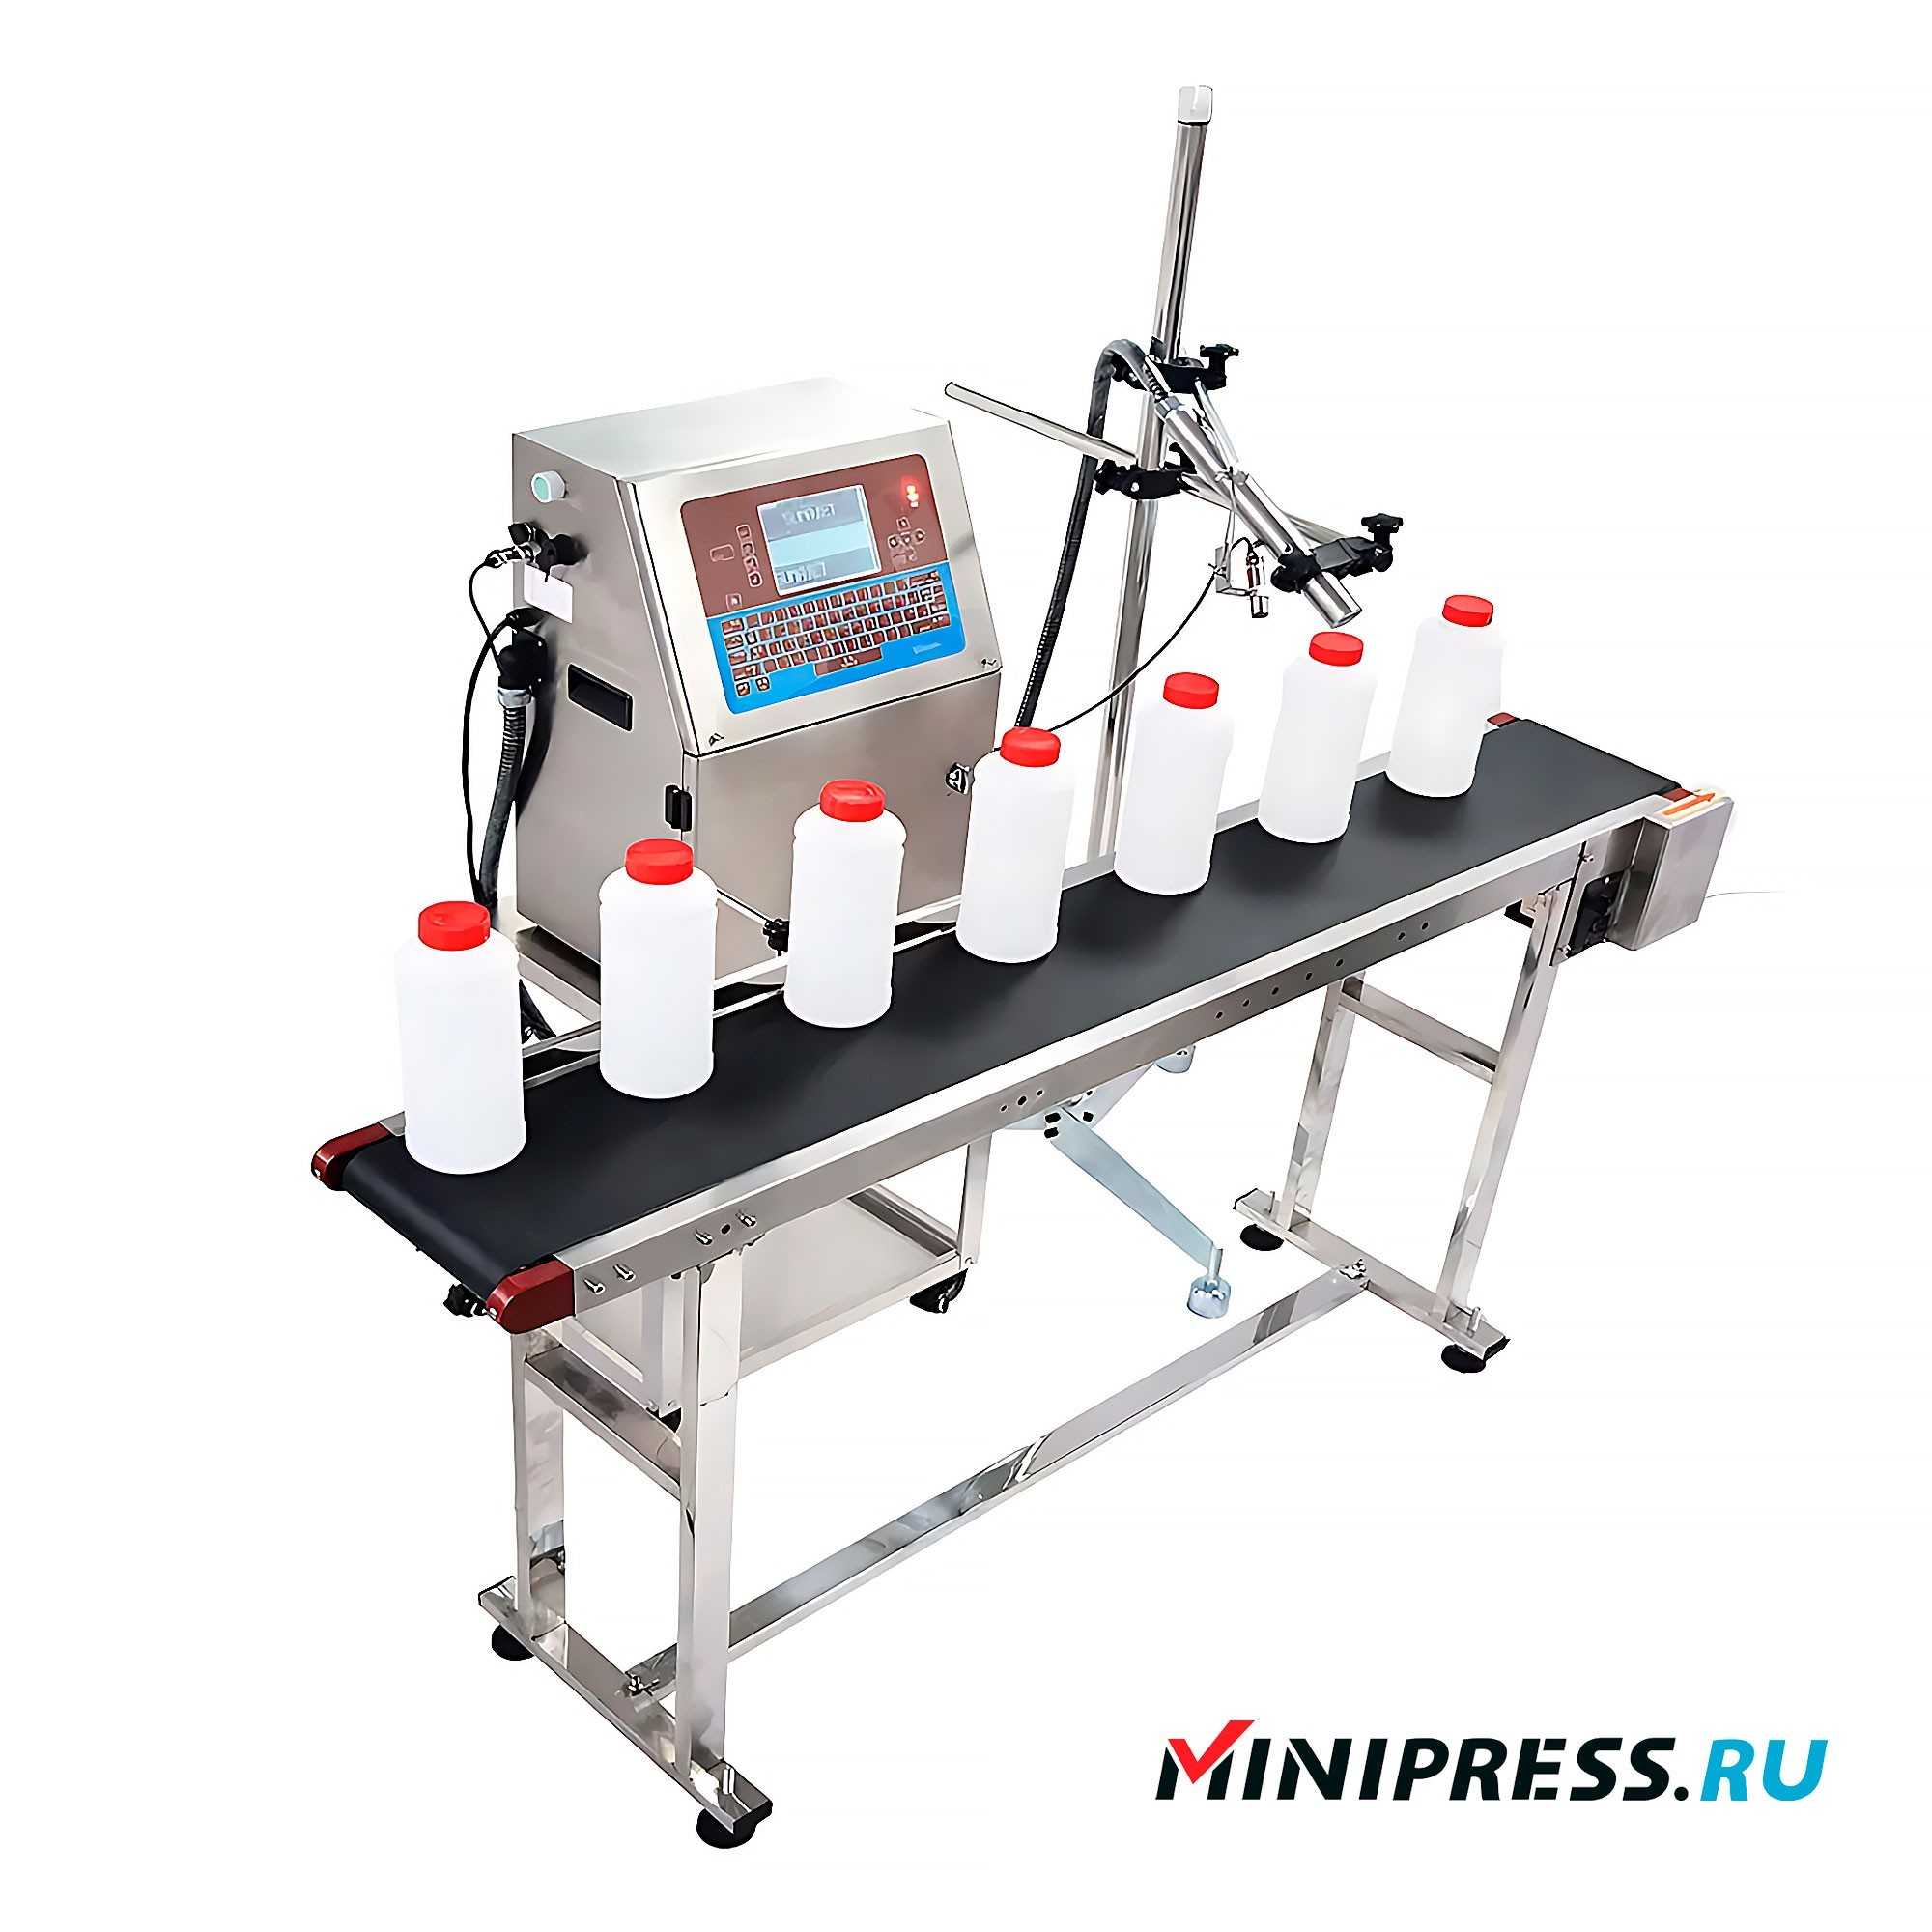 Industrial injekt printer for date and QR code printing LV-09